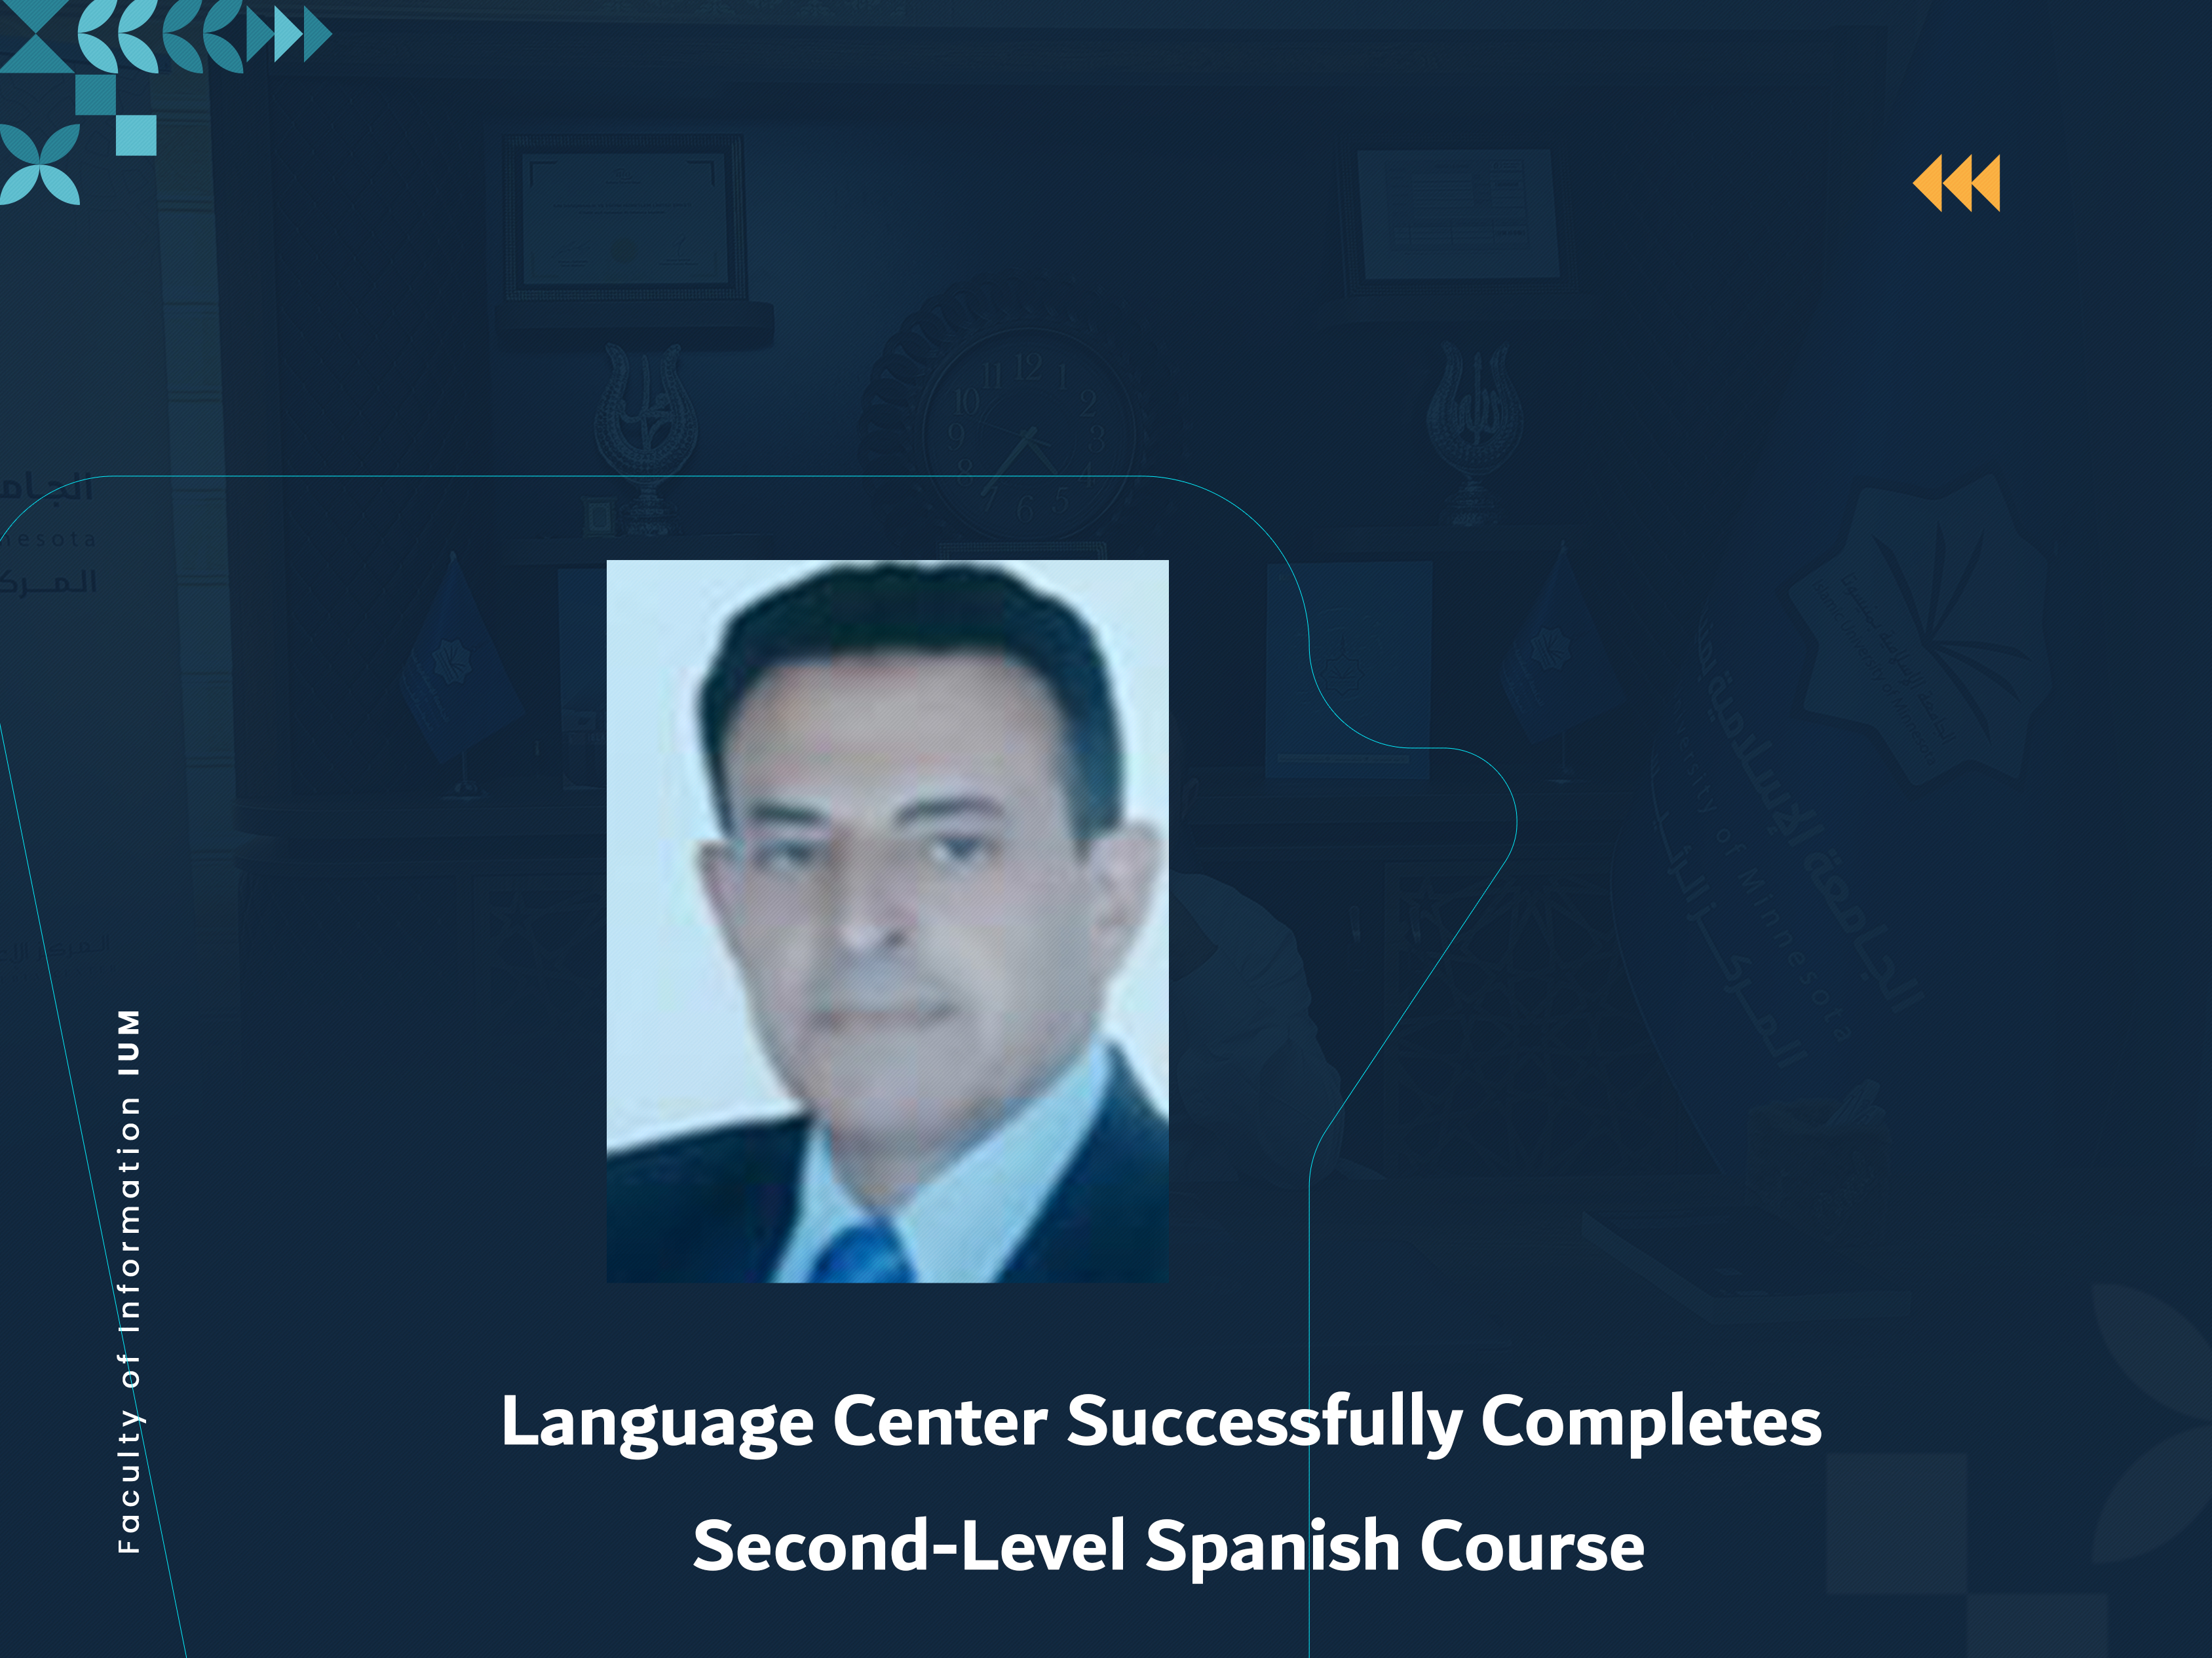 Language Center Successfully Completes Second-Level Spanish Course